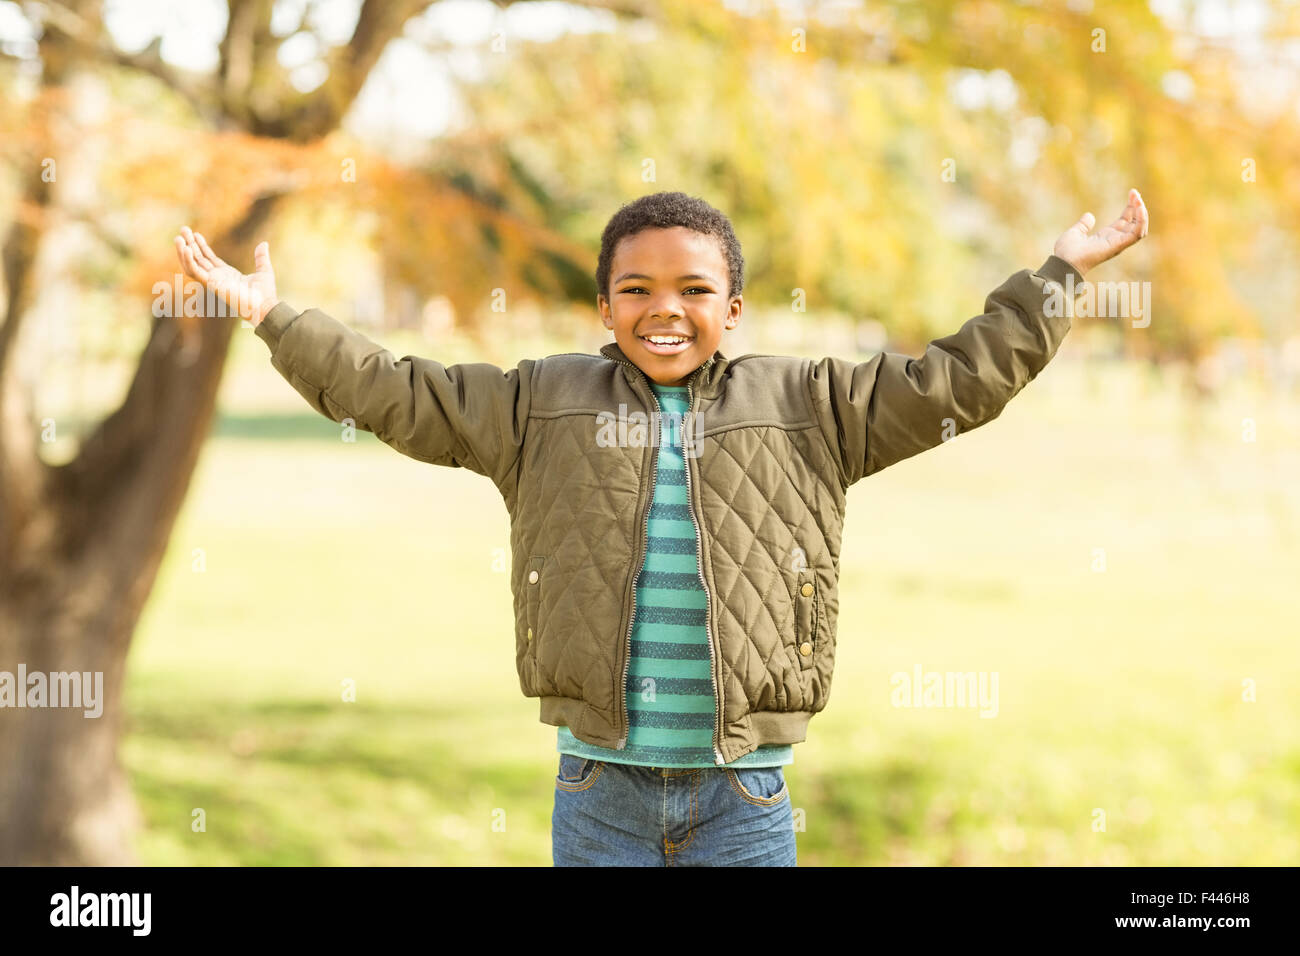 Portrait of a little boy with outstretched arms Stock Photo